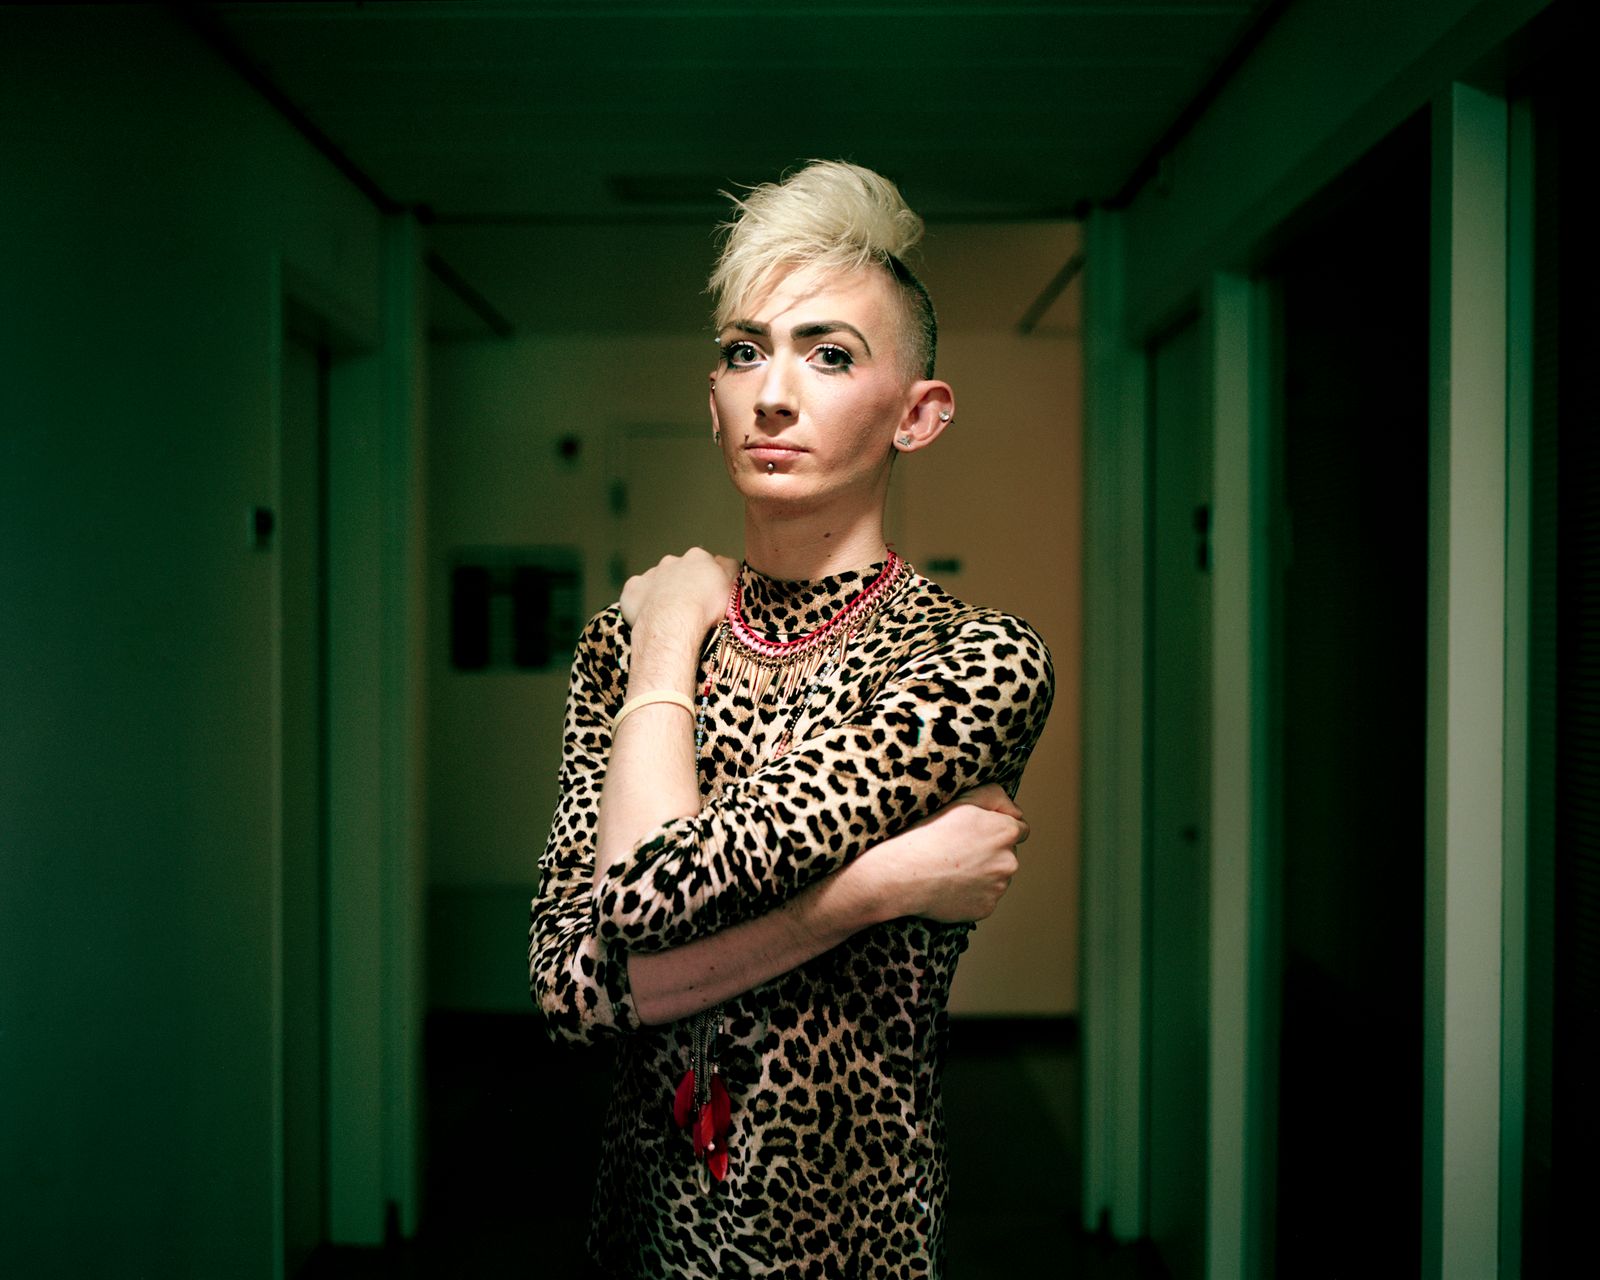 © Mafalda Rakoš - Ramon, affected by anorexia, chose to be photographed in his former clinic in the Netherlands. 2018.